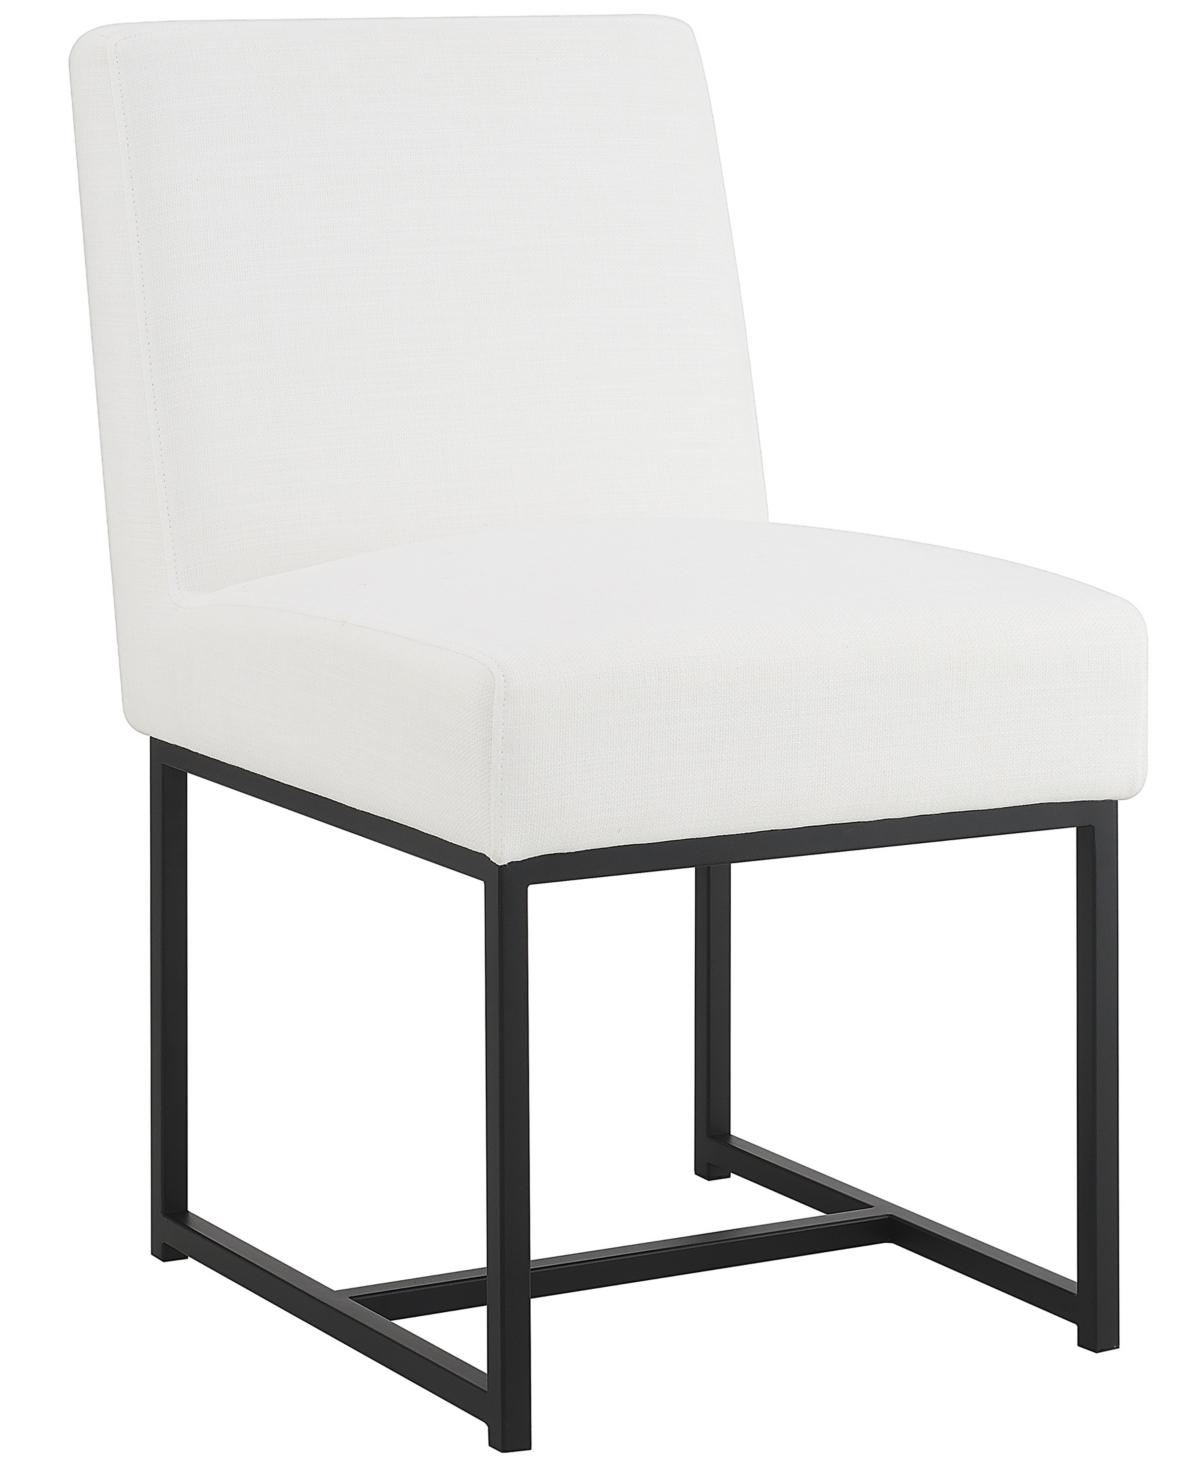 Abbyson Living Luxe 33.5 Fabric Dining Chair In White